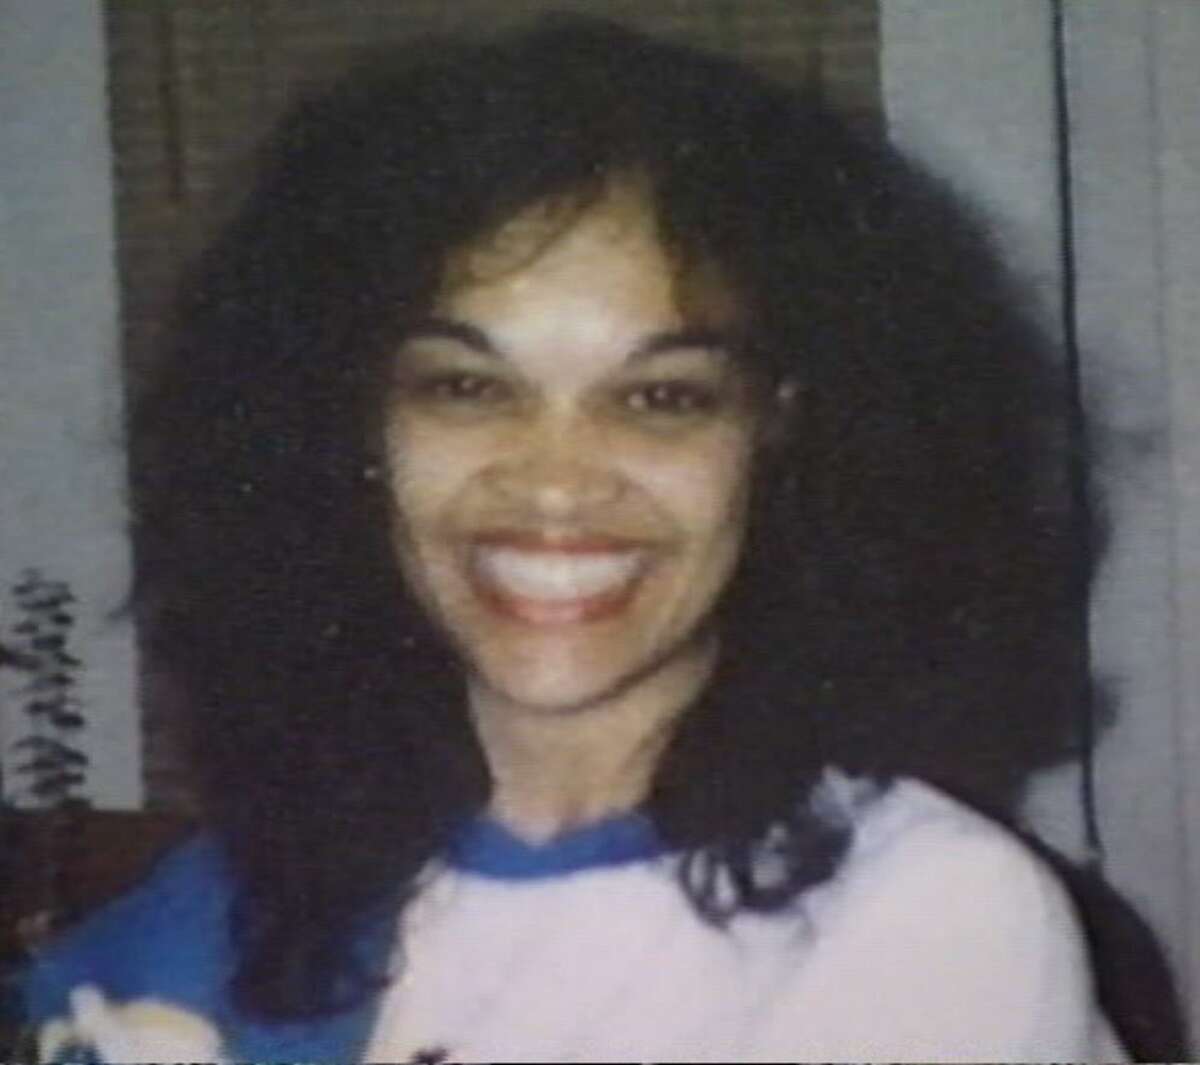 Mary Jane LeFlore was last seen on July 19, 1991. Her body was found on Feb. 9, 1993, when a man claiming to be a prospective land buyer saw her remains on land near Highway 30. Police identified LeFlore's through her dental records and the jewelry.